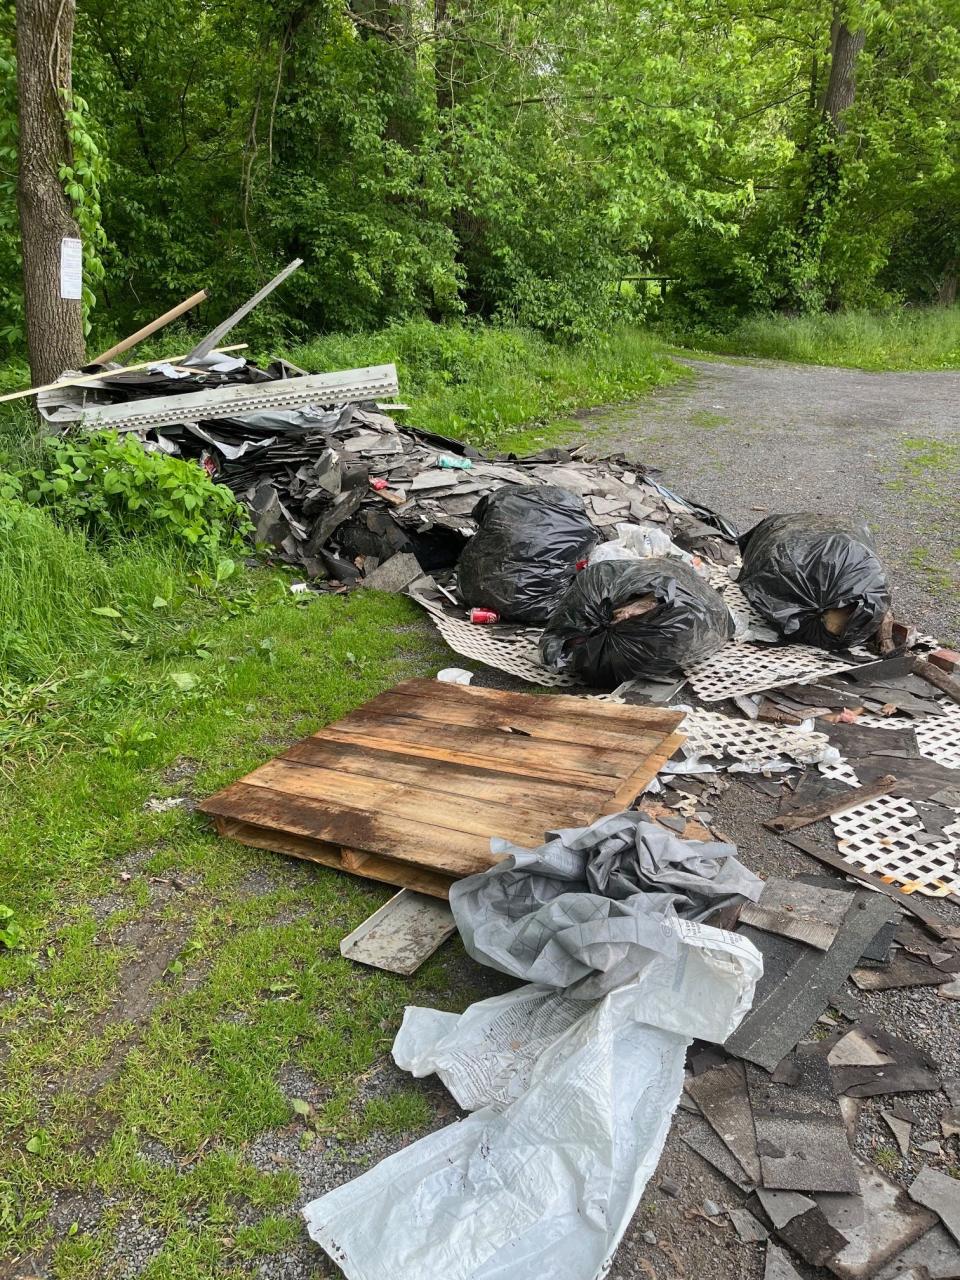 Cleona Borough Police are looking for leads in their investigation of an illegal dumping incident in the area of 8001 Valley Glen Road.